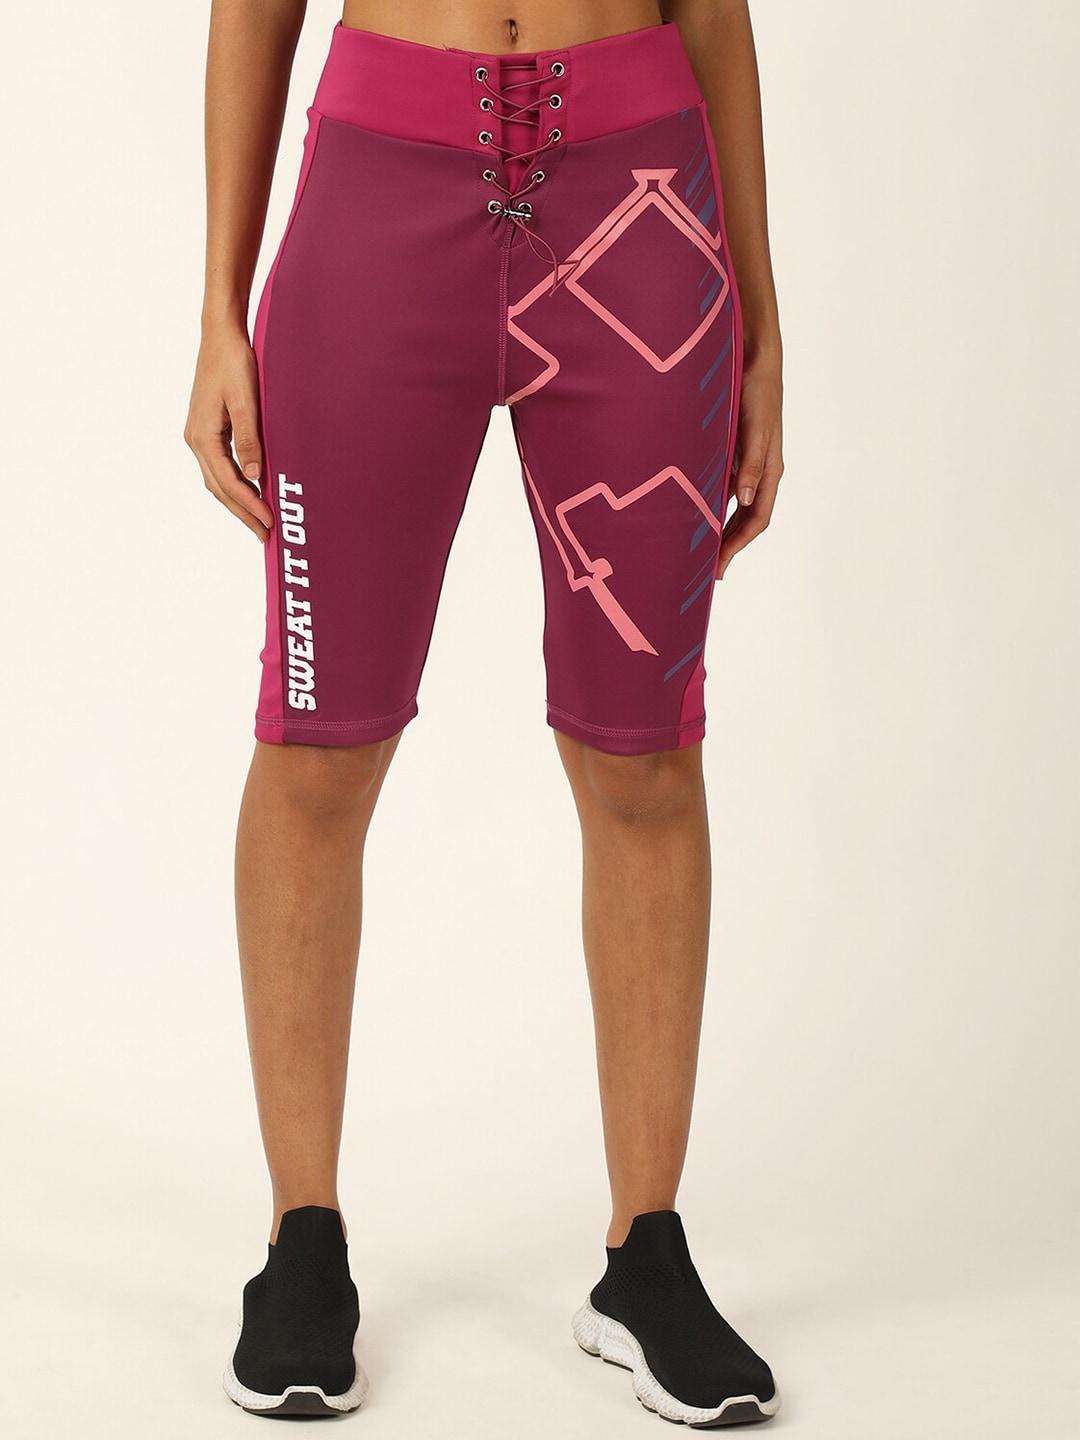 forever-21-women-pink-printed-sports-shorts